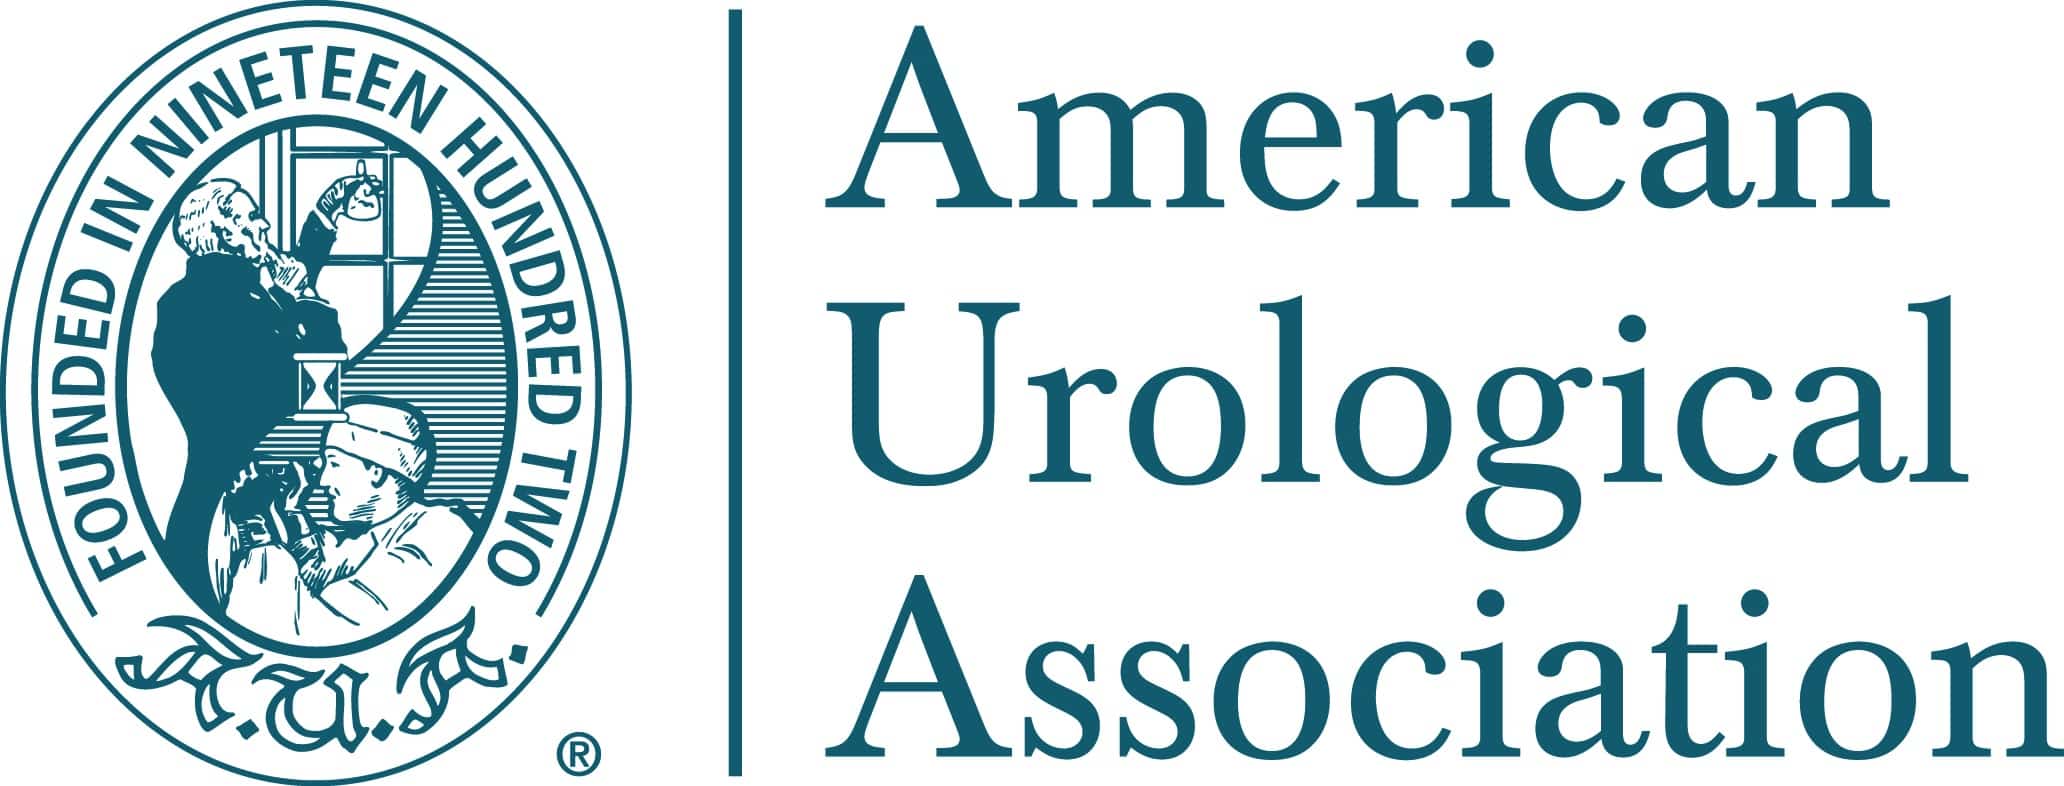 American College of Urologists